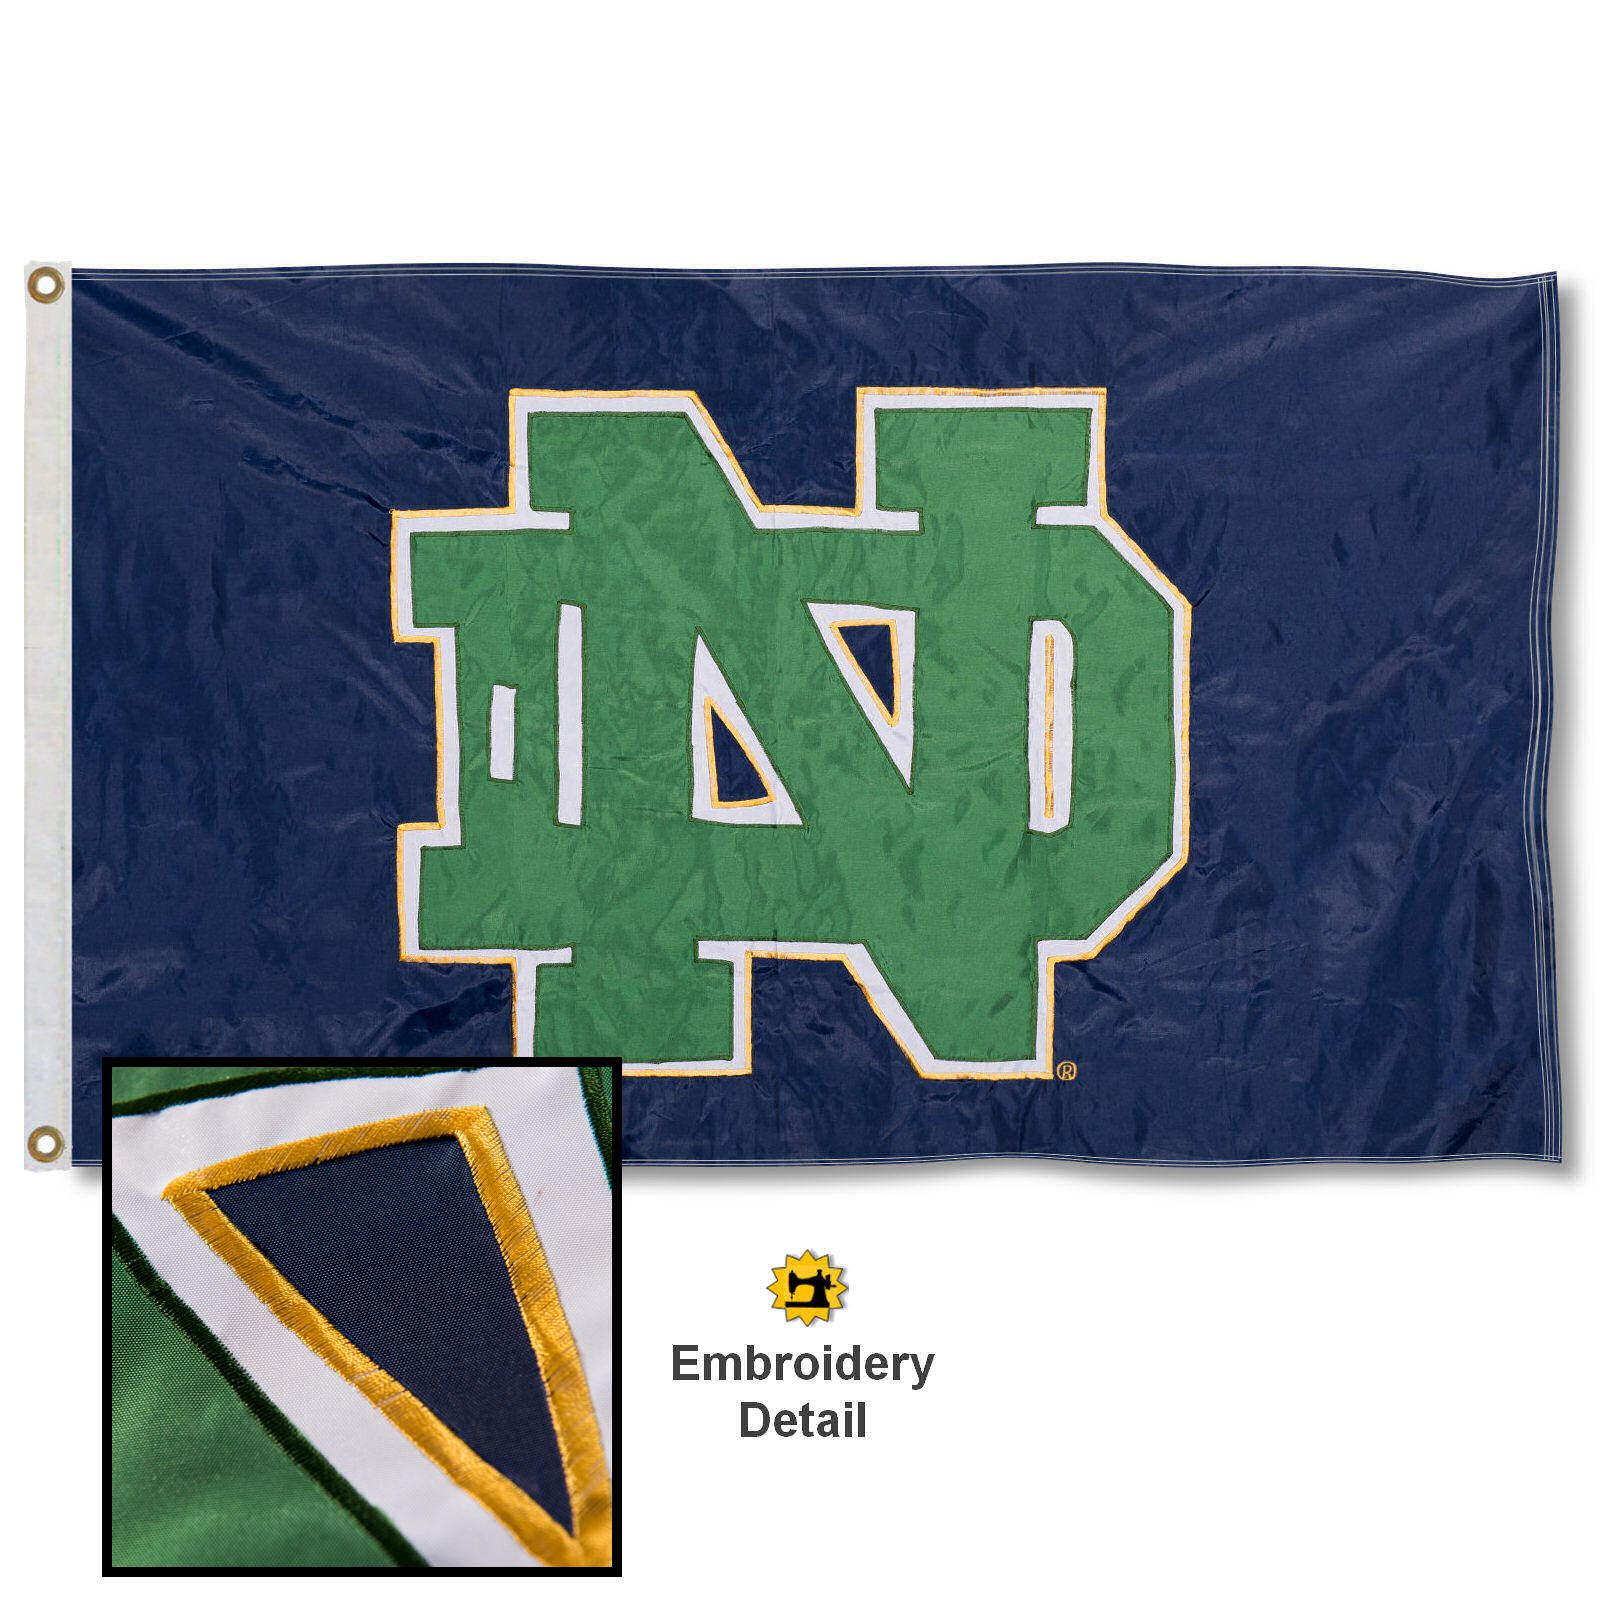 Notre Dame Fighting Irish Embroidered and Appliqued Nylon Flag